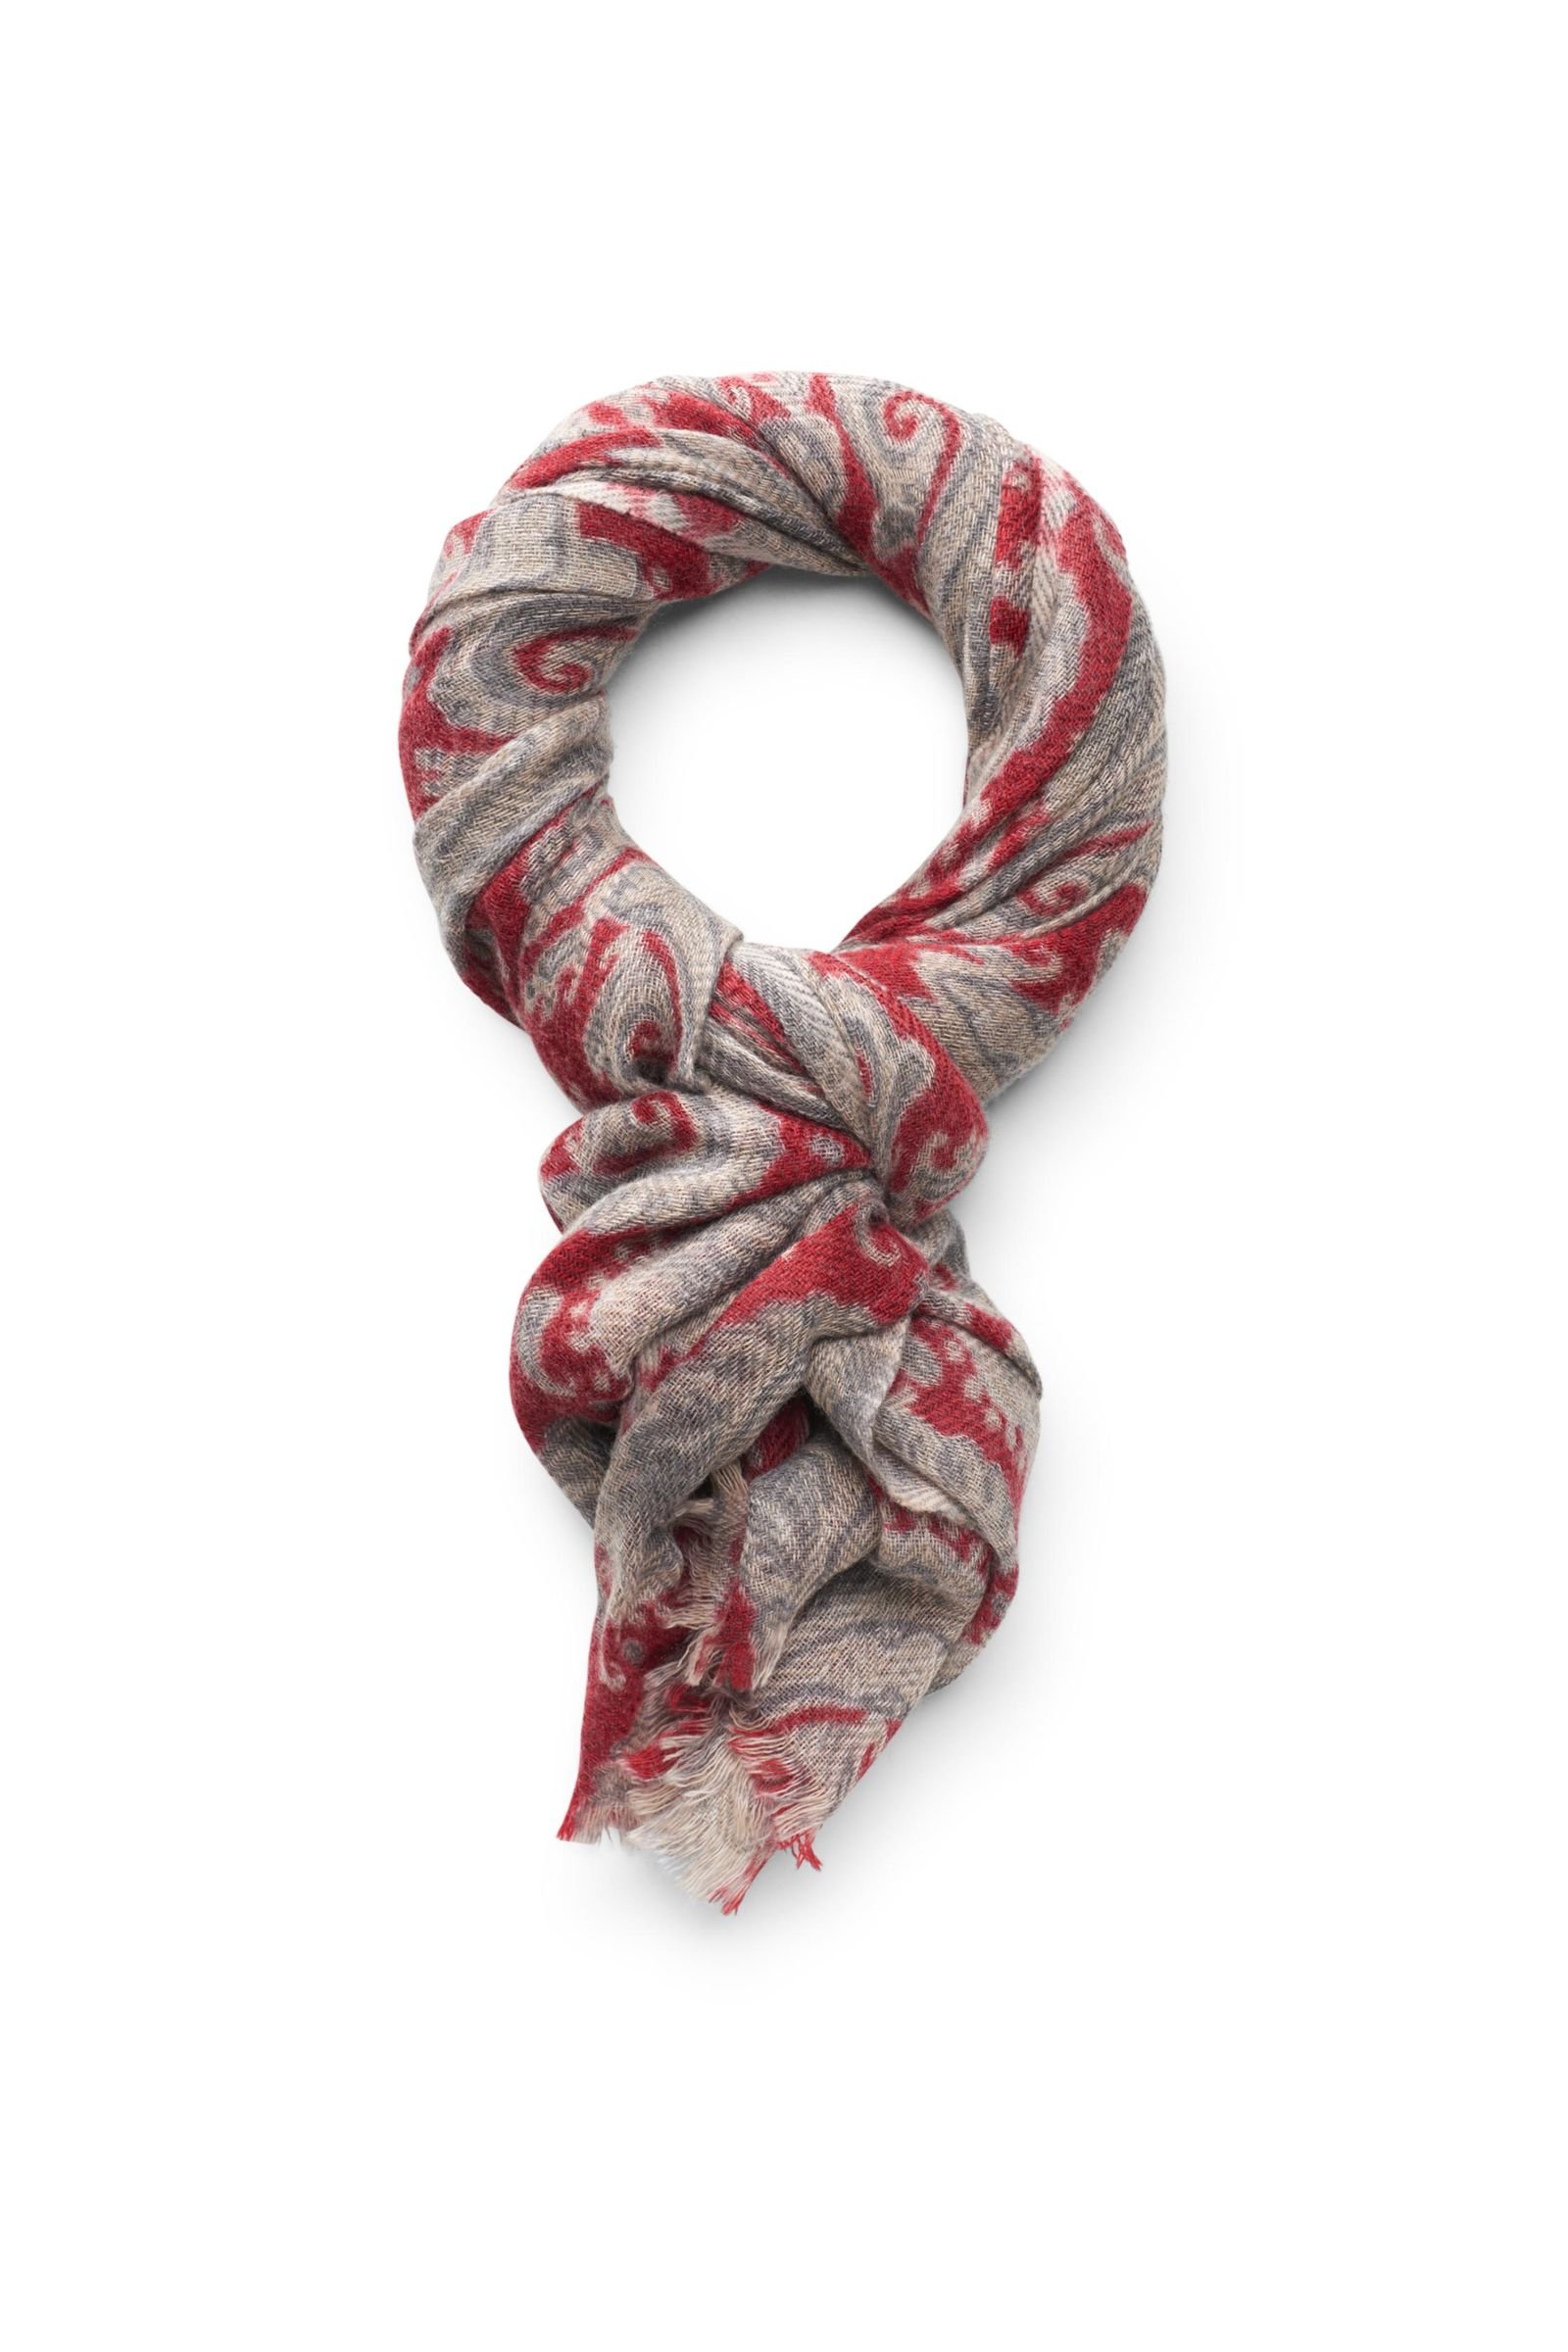 Cashmere scarf red/grey patterned